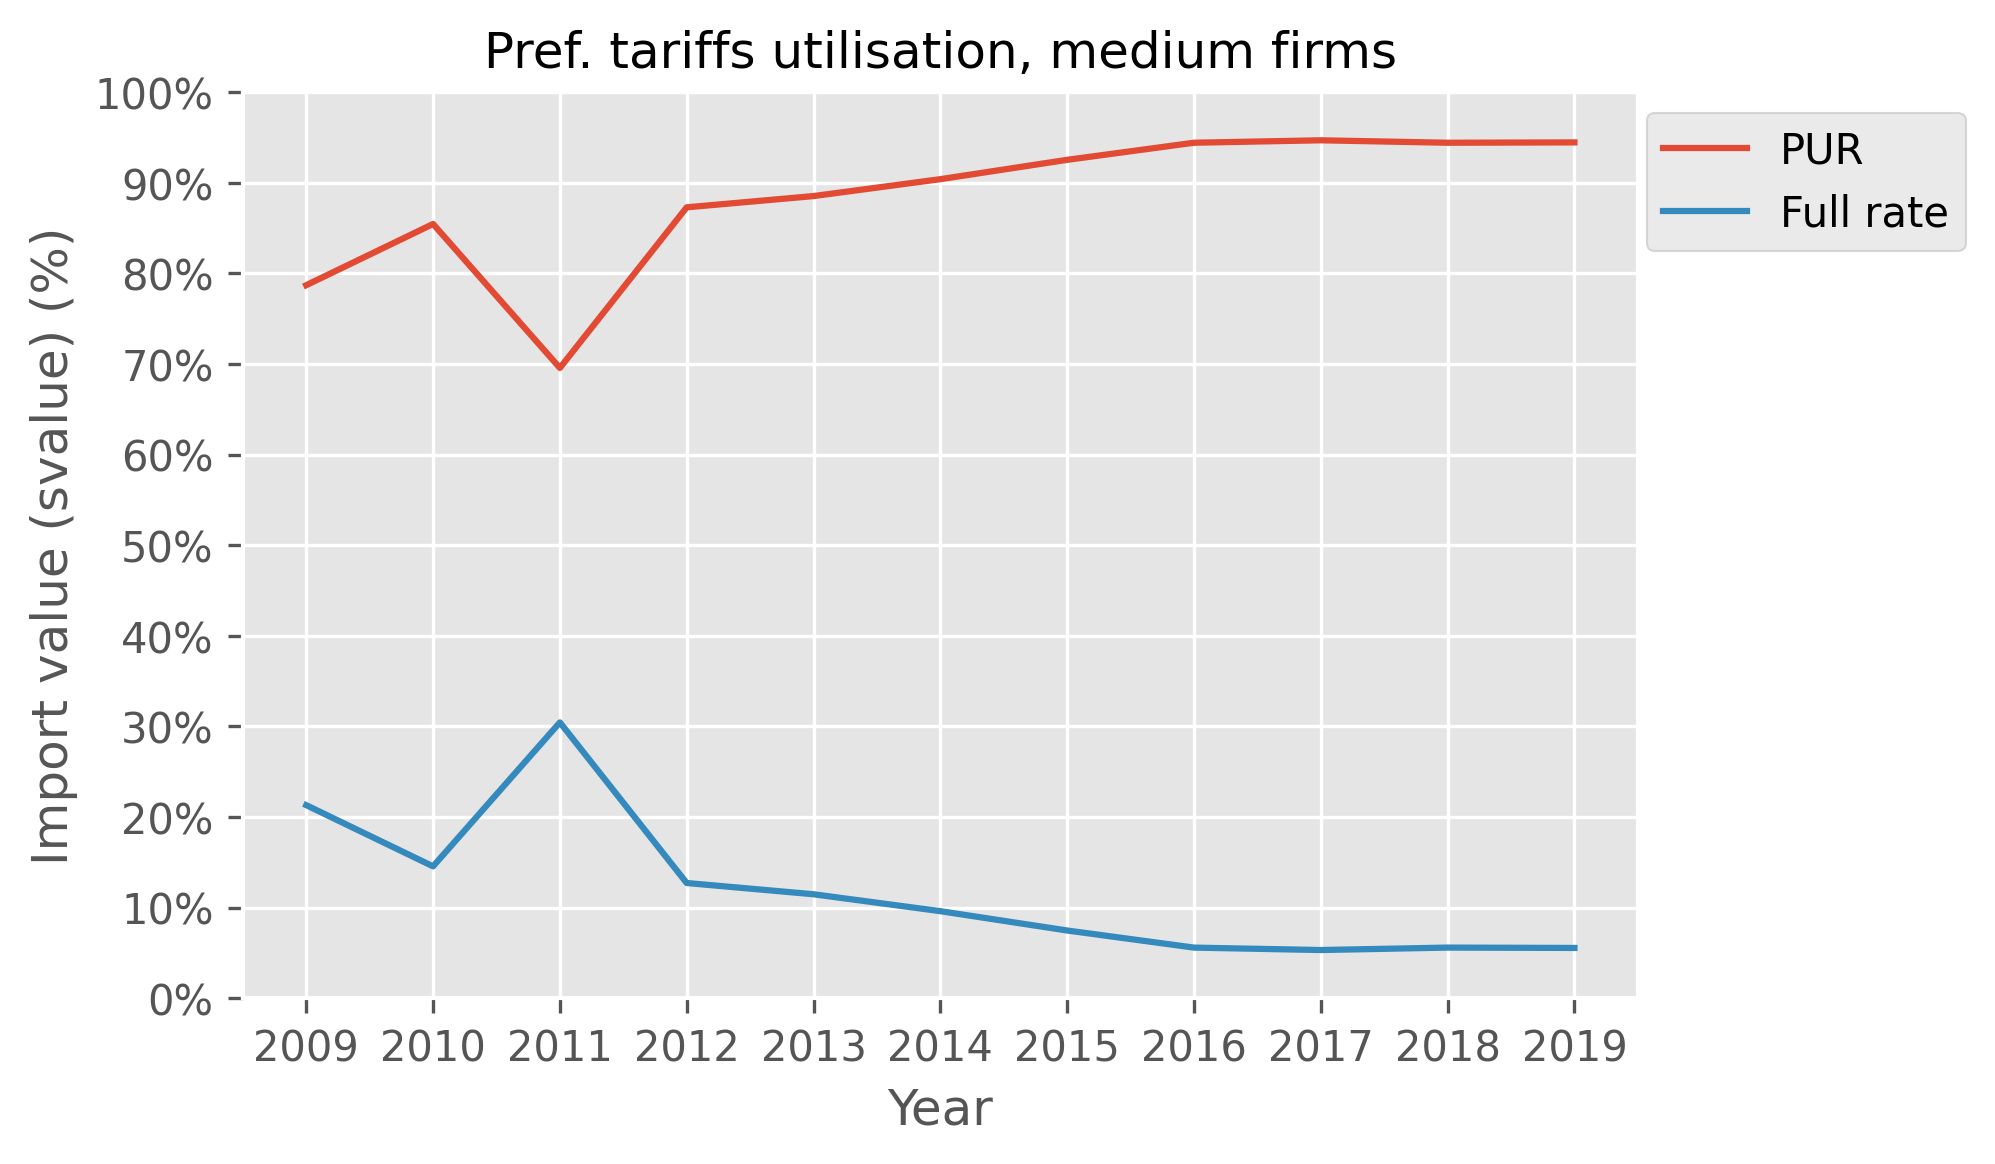 Figure 18: Time series of import transaction value, by tariff type for medium size firms, which shows a sudden drop in 2011, although it recovers in 2012 and continues to ascend, reaching proportions above 94%.